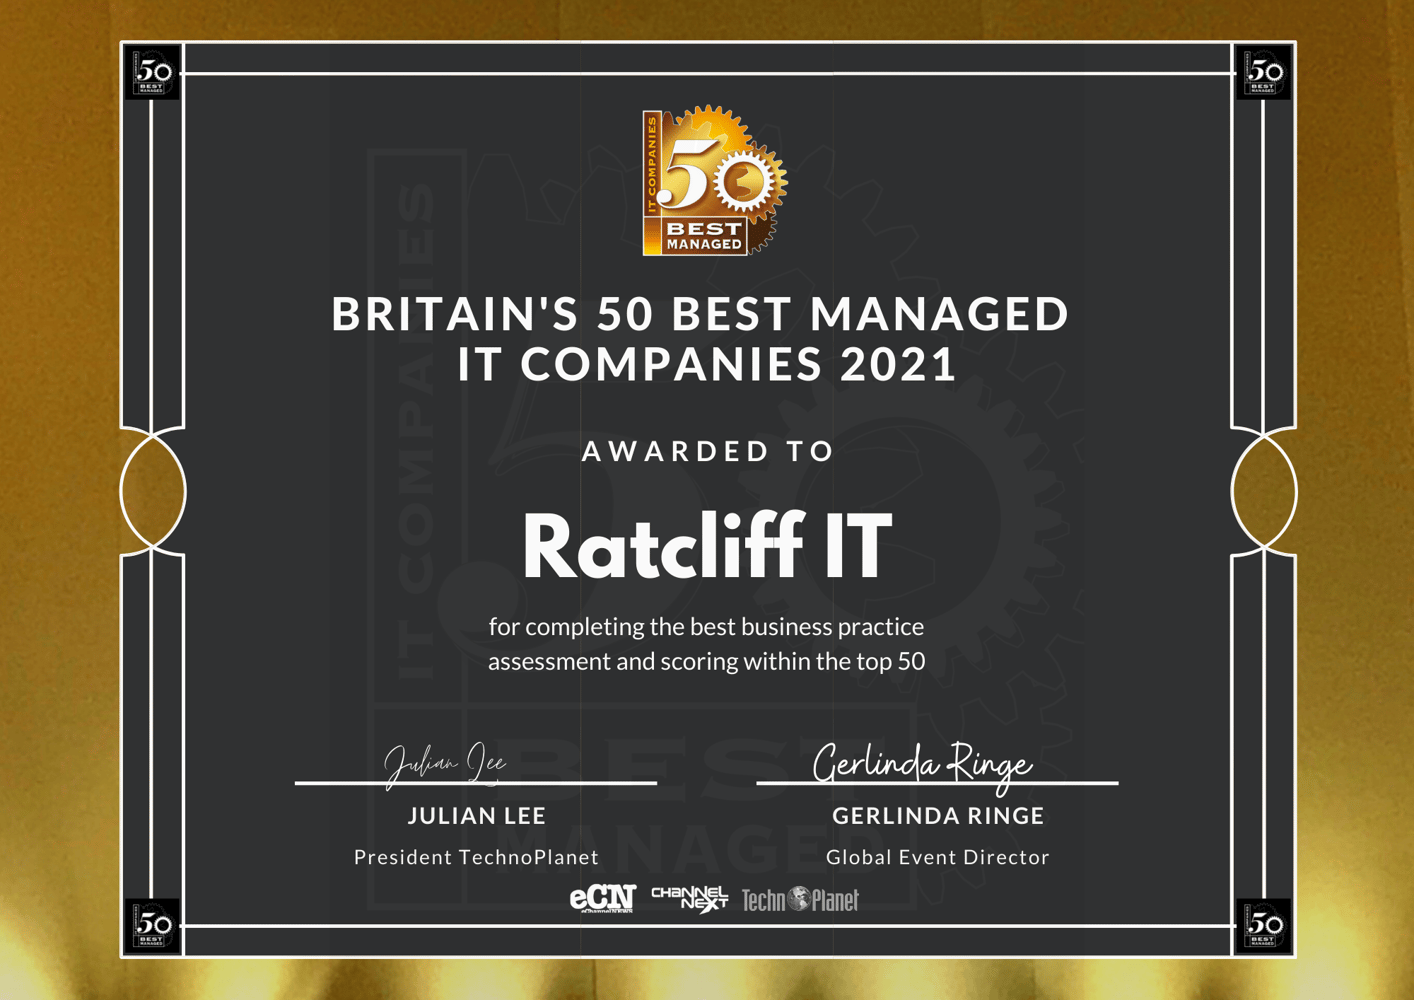 It’s official, we’re one of Britain’s 50 Best Managed IT Companies Again!